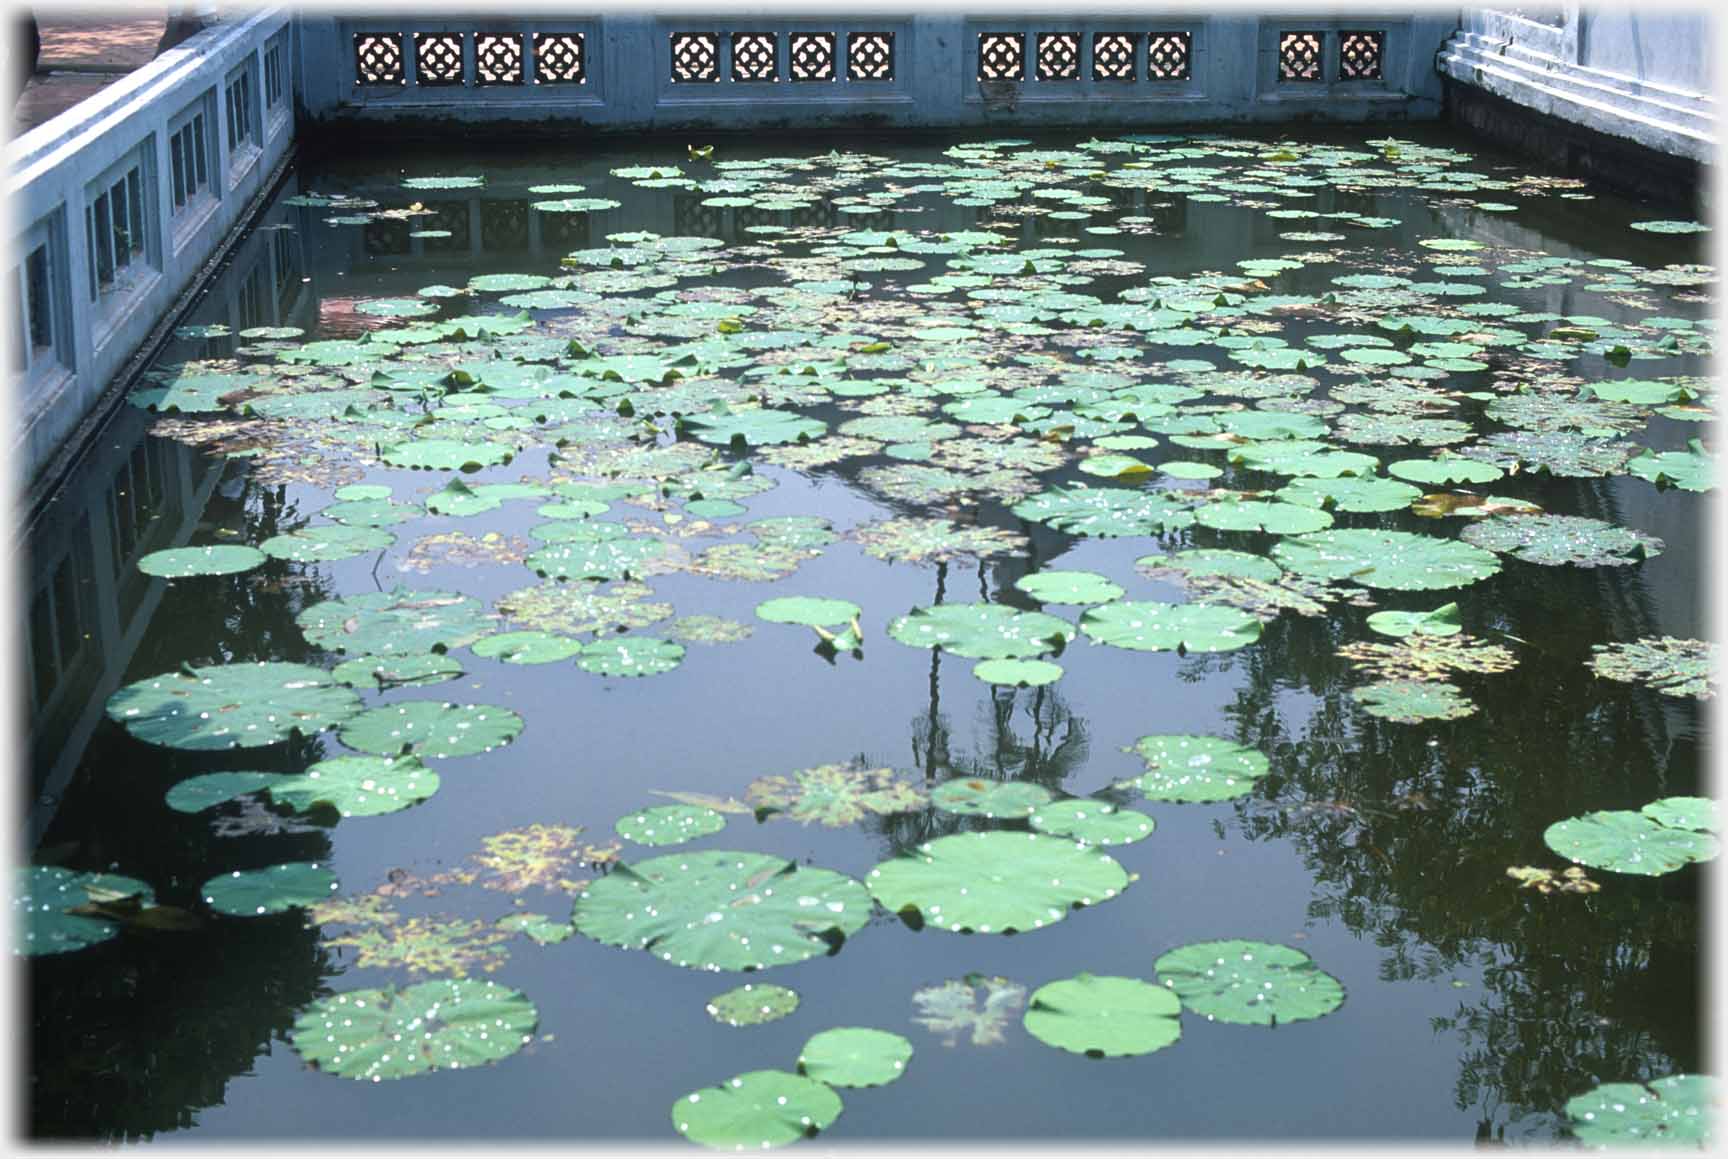 Waterlilies in pool with surrounding balustrade.